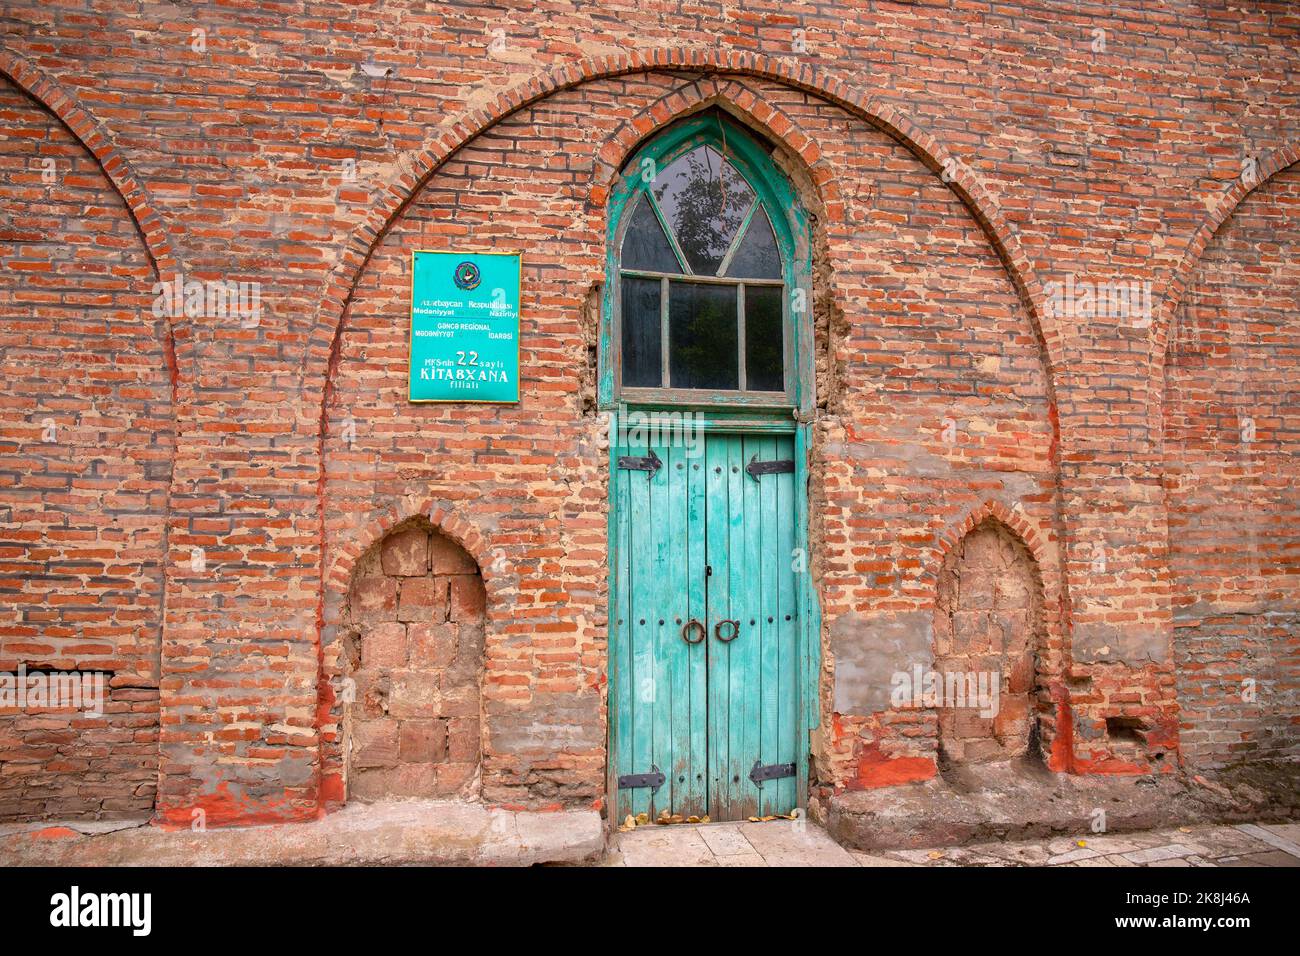 Ganja. Azerbaijan. 07.28.2021. The old Gyrykhly mosque. Built in the Gyrykhly quarter in the 19th century. Stock Photo